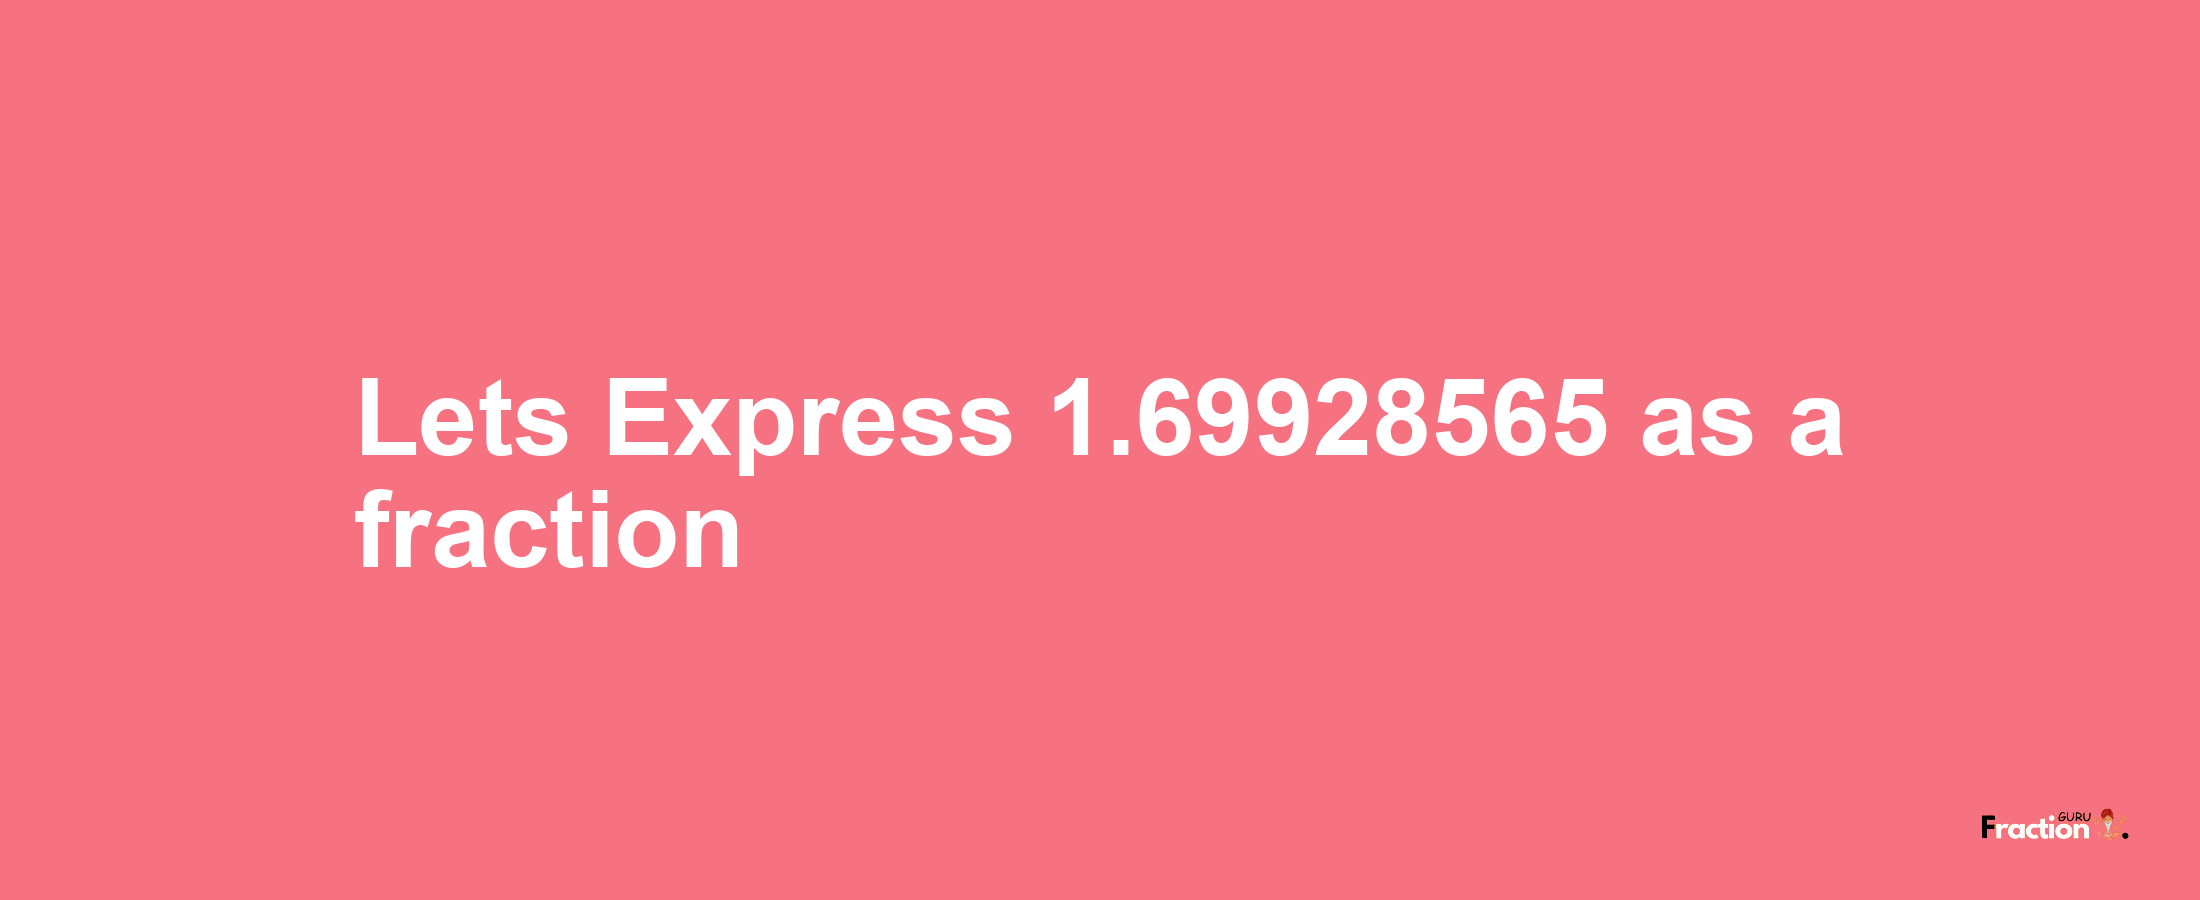 Lets Express 1.69928565 as afraction